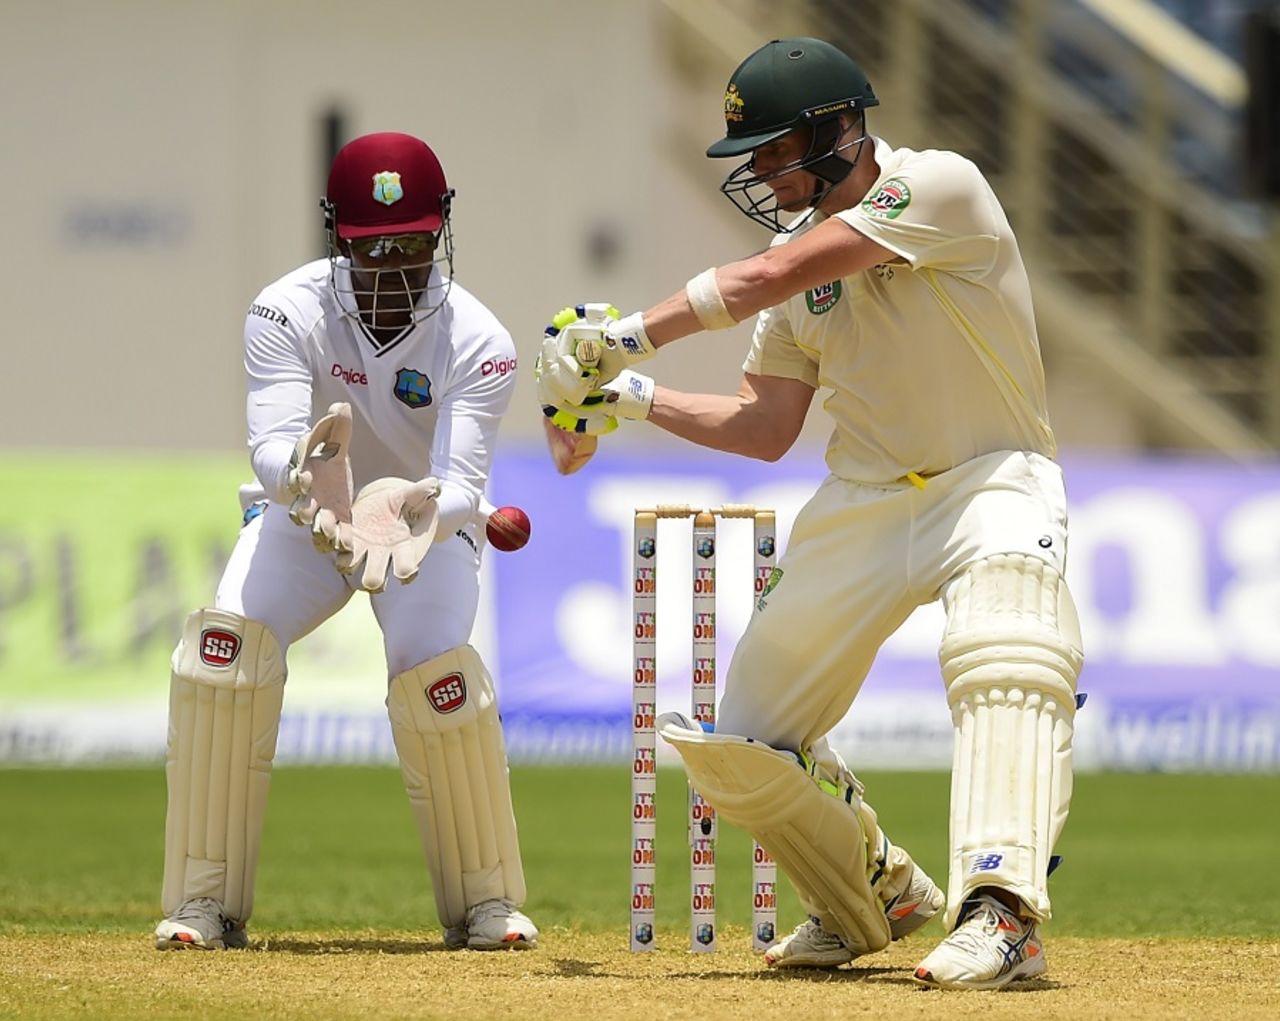 Steven Smith shapes to cut, West Indies v Australia, 2nd Test, 2nd day, Kingston, June 12, 2015